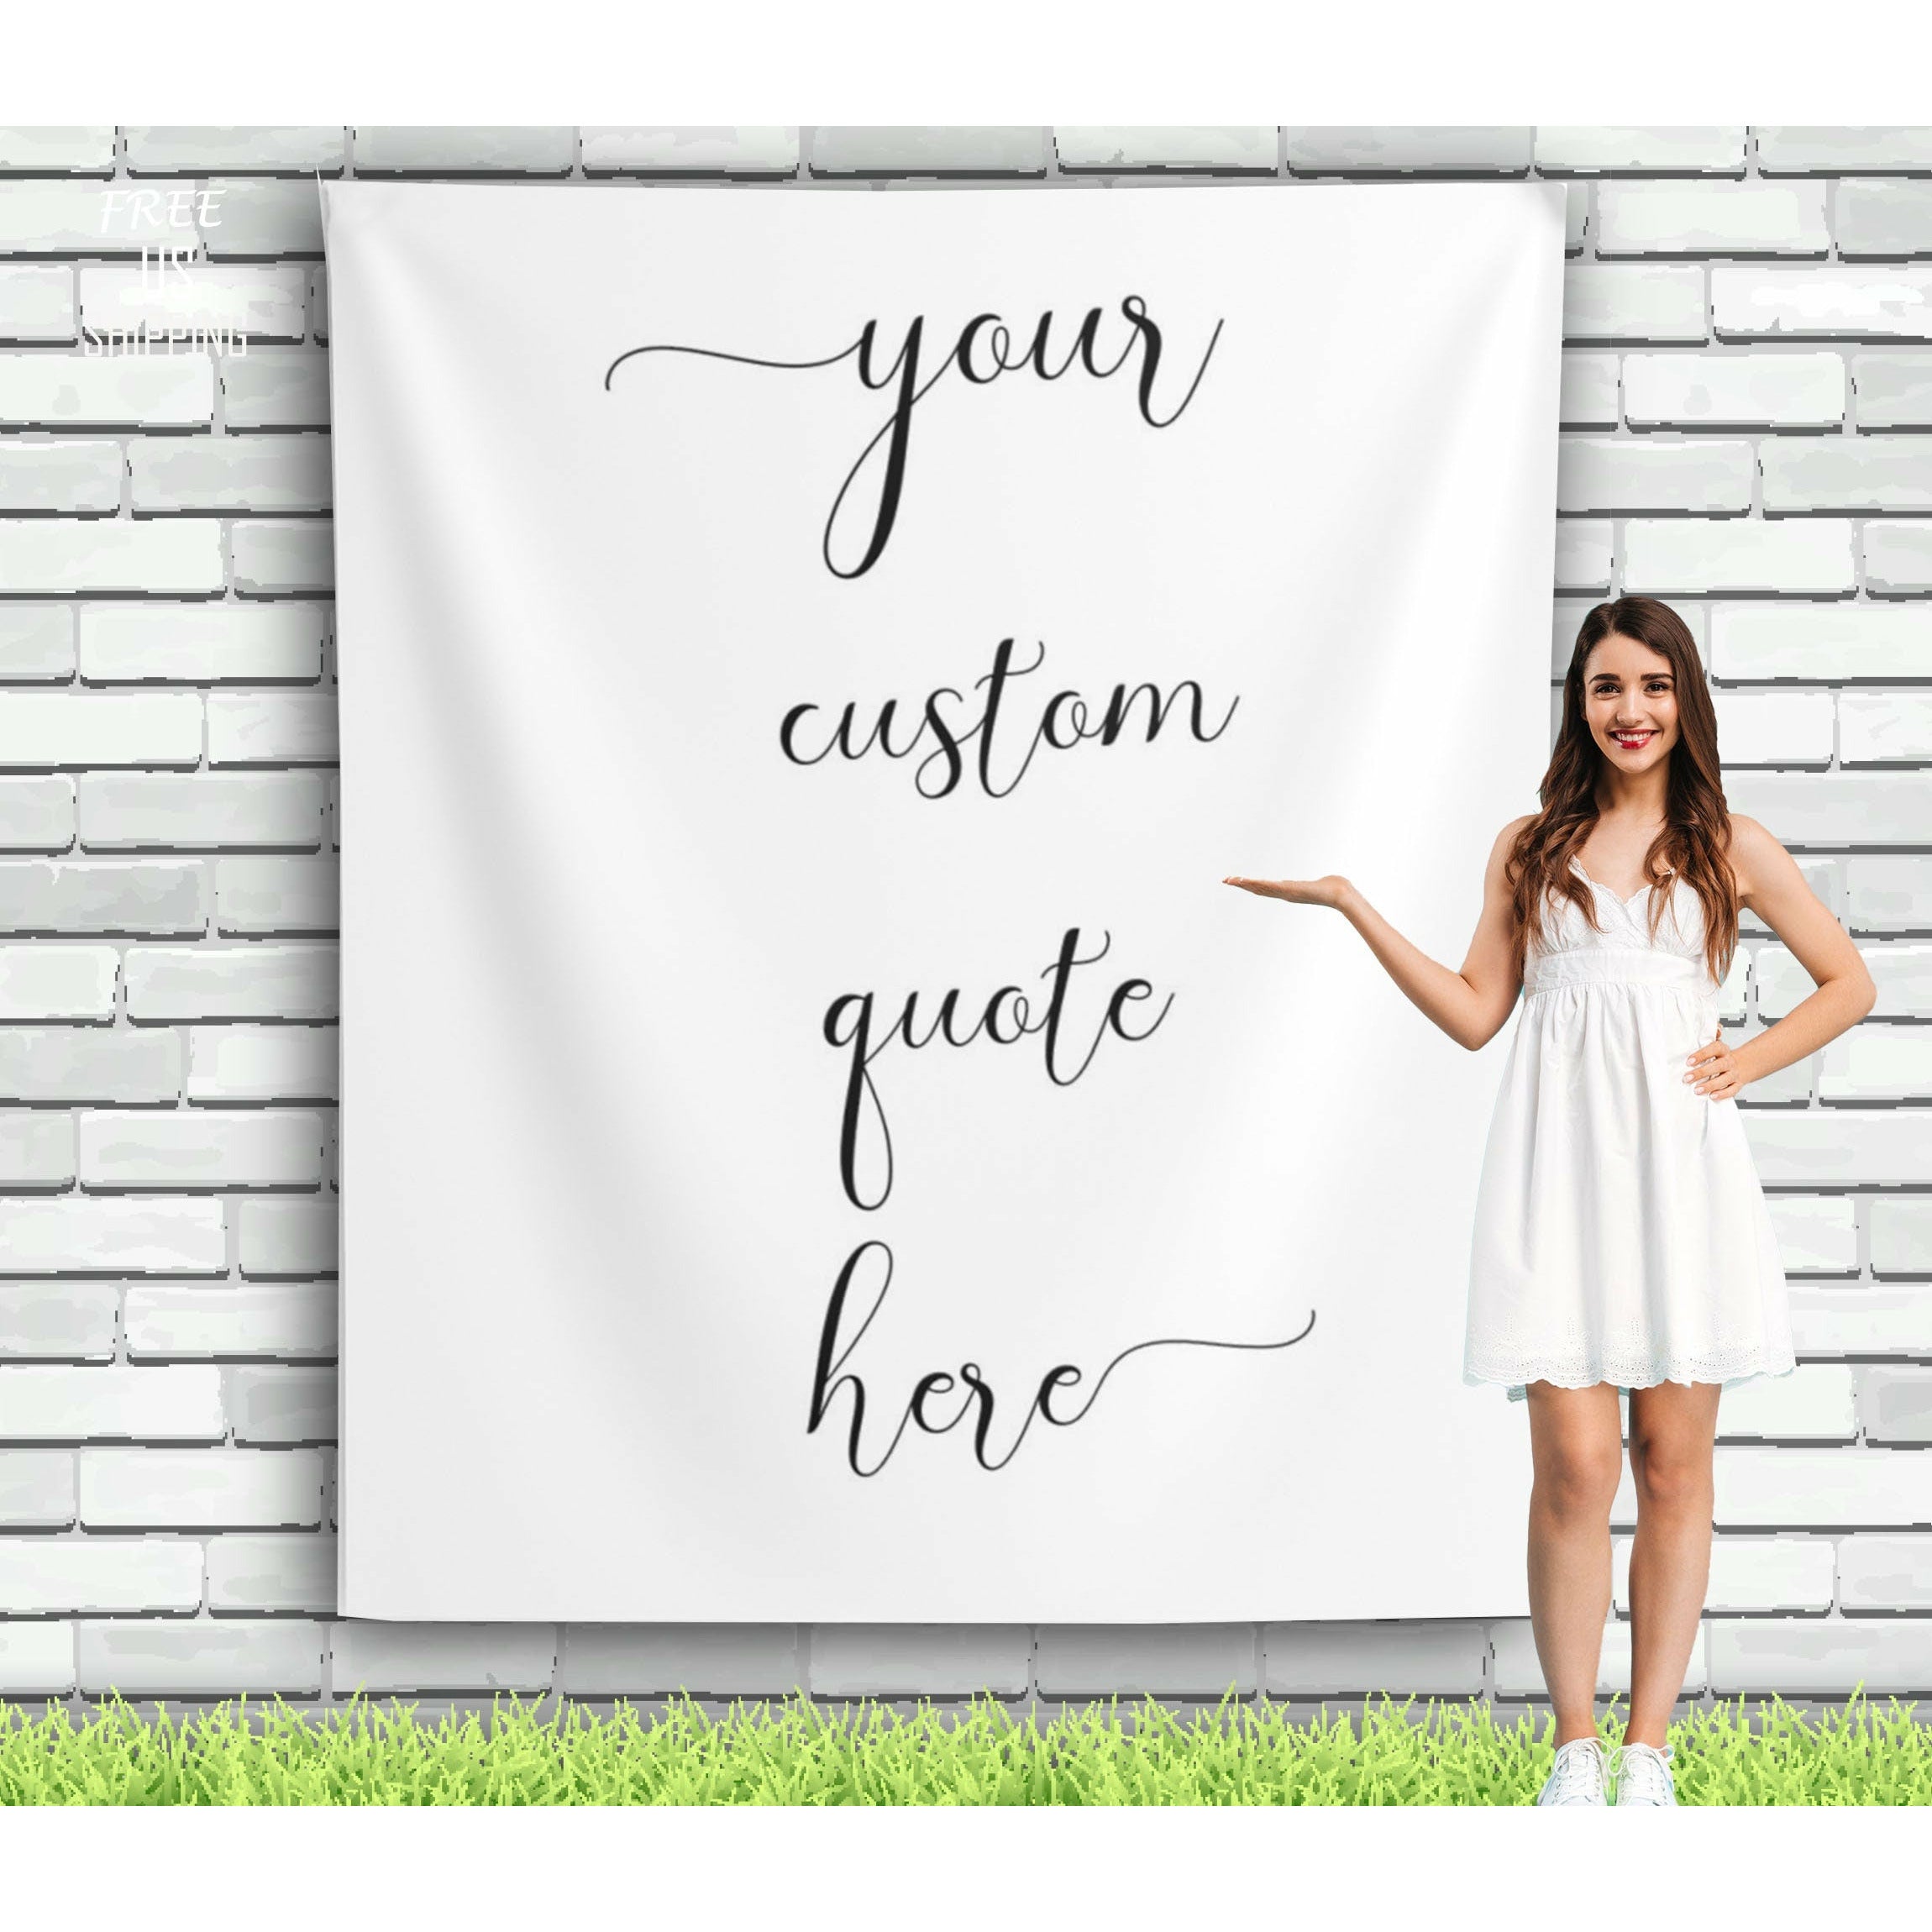 Custom Quote Backdrop for Weddings